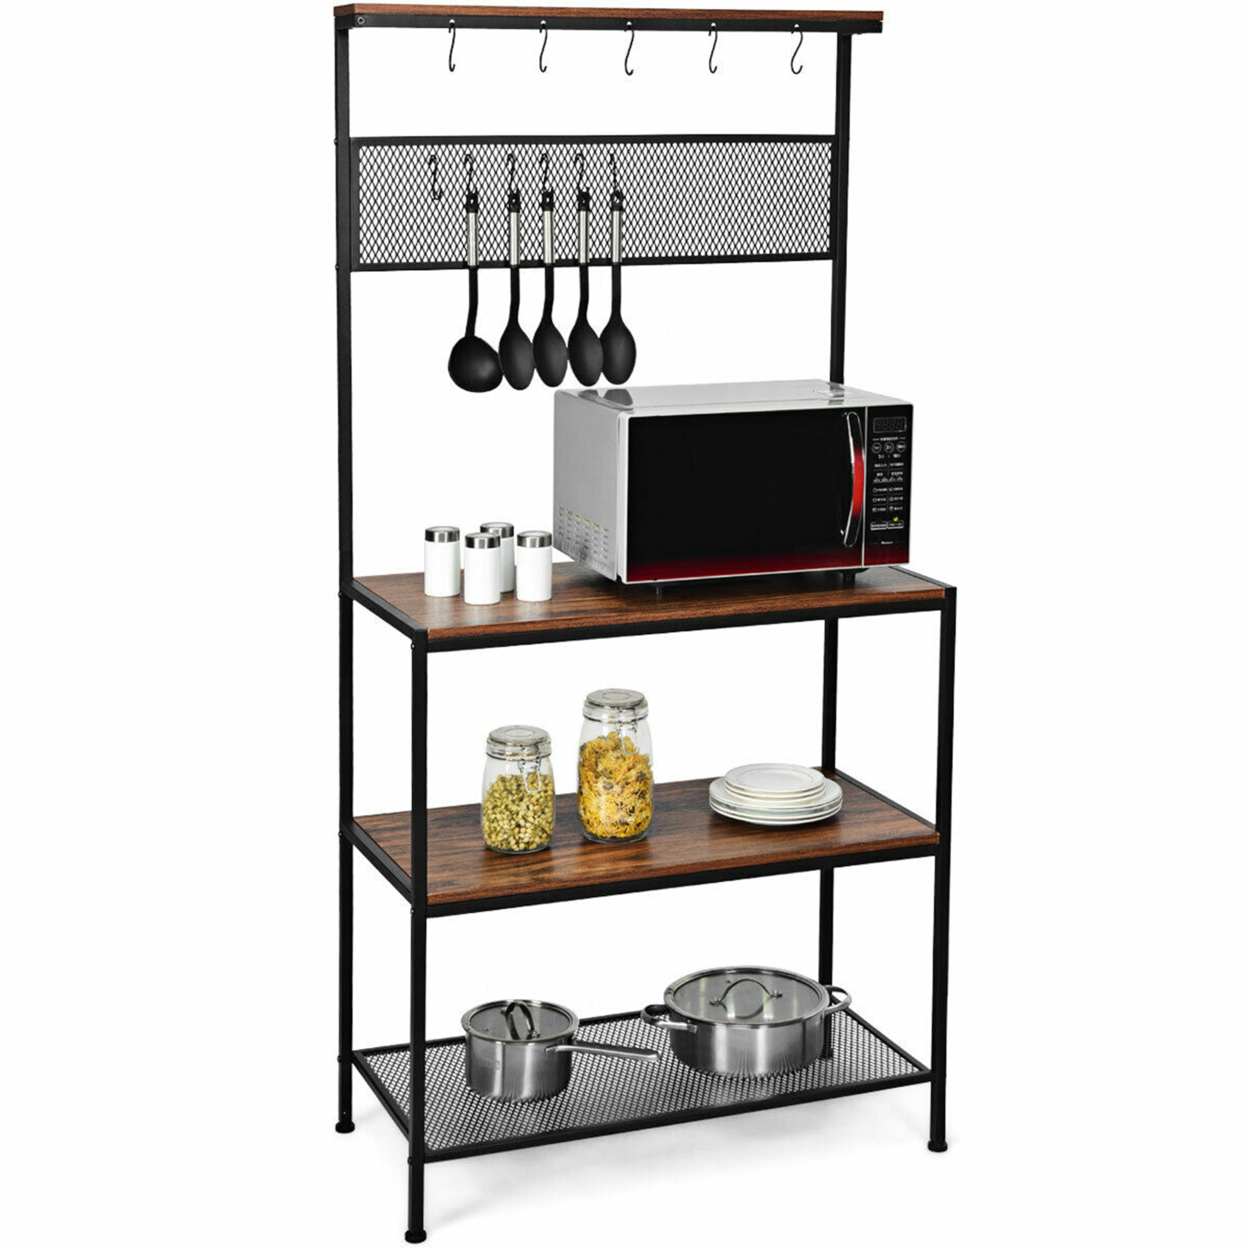 4-Tier Kitchen Bakers Rack Microwave Oven Stand Industrial W/Hooks & Mesh Panel